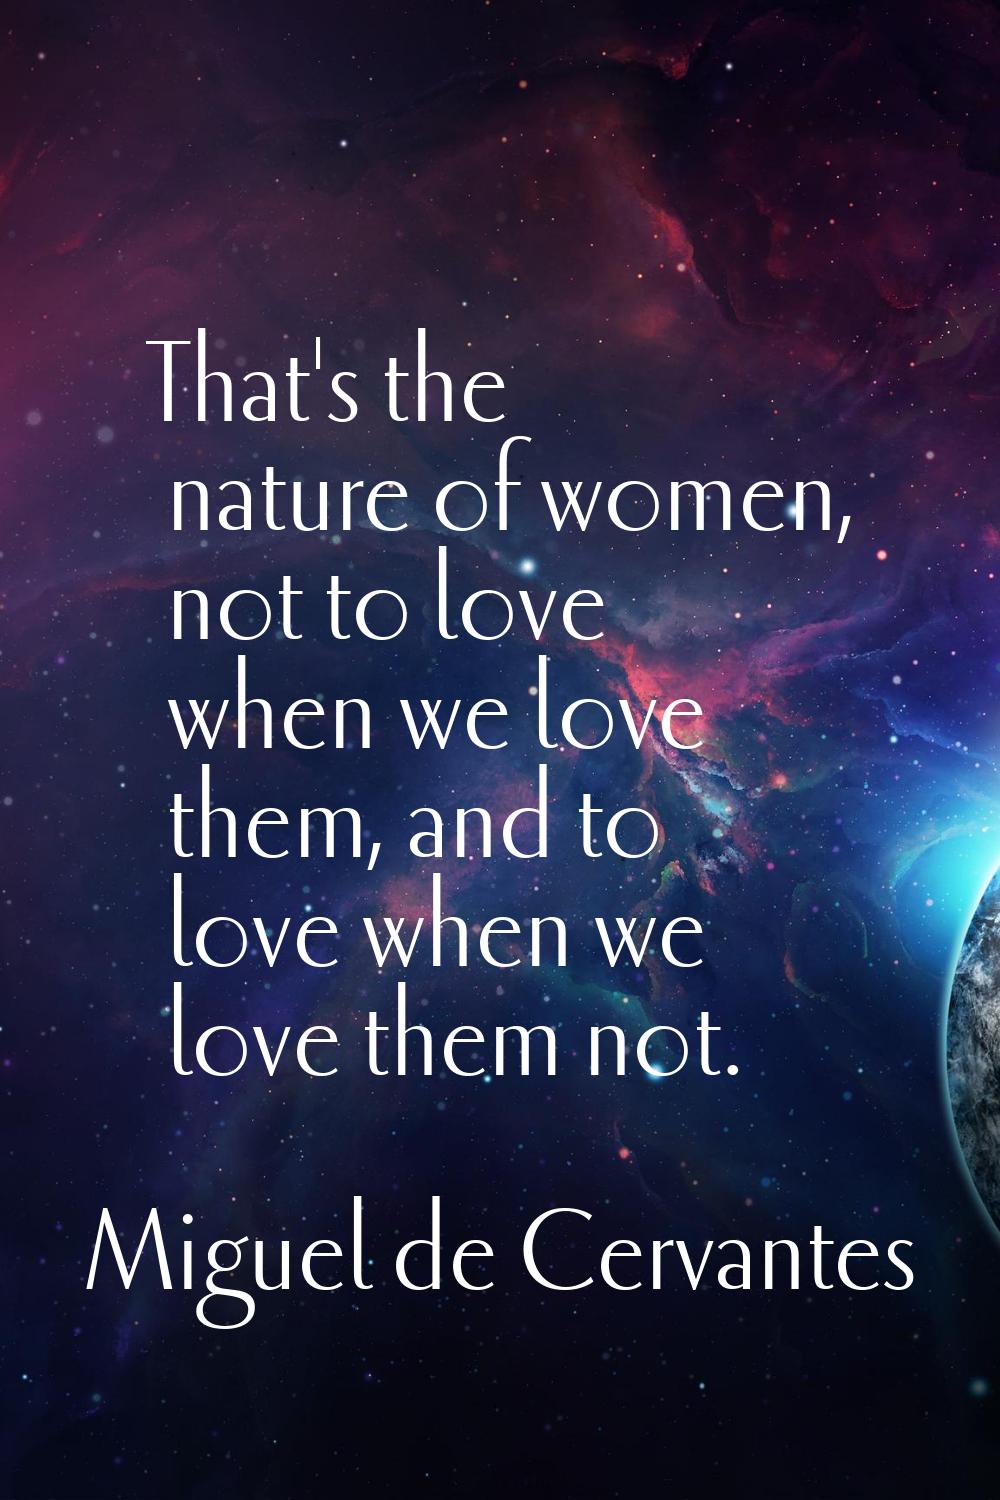 That's the nature of women, not to love when we love them, and to love when we love them not.